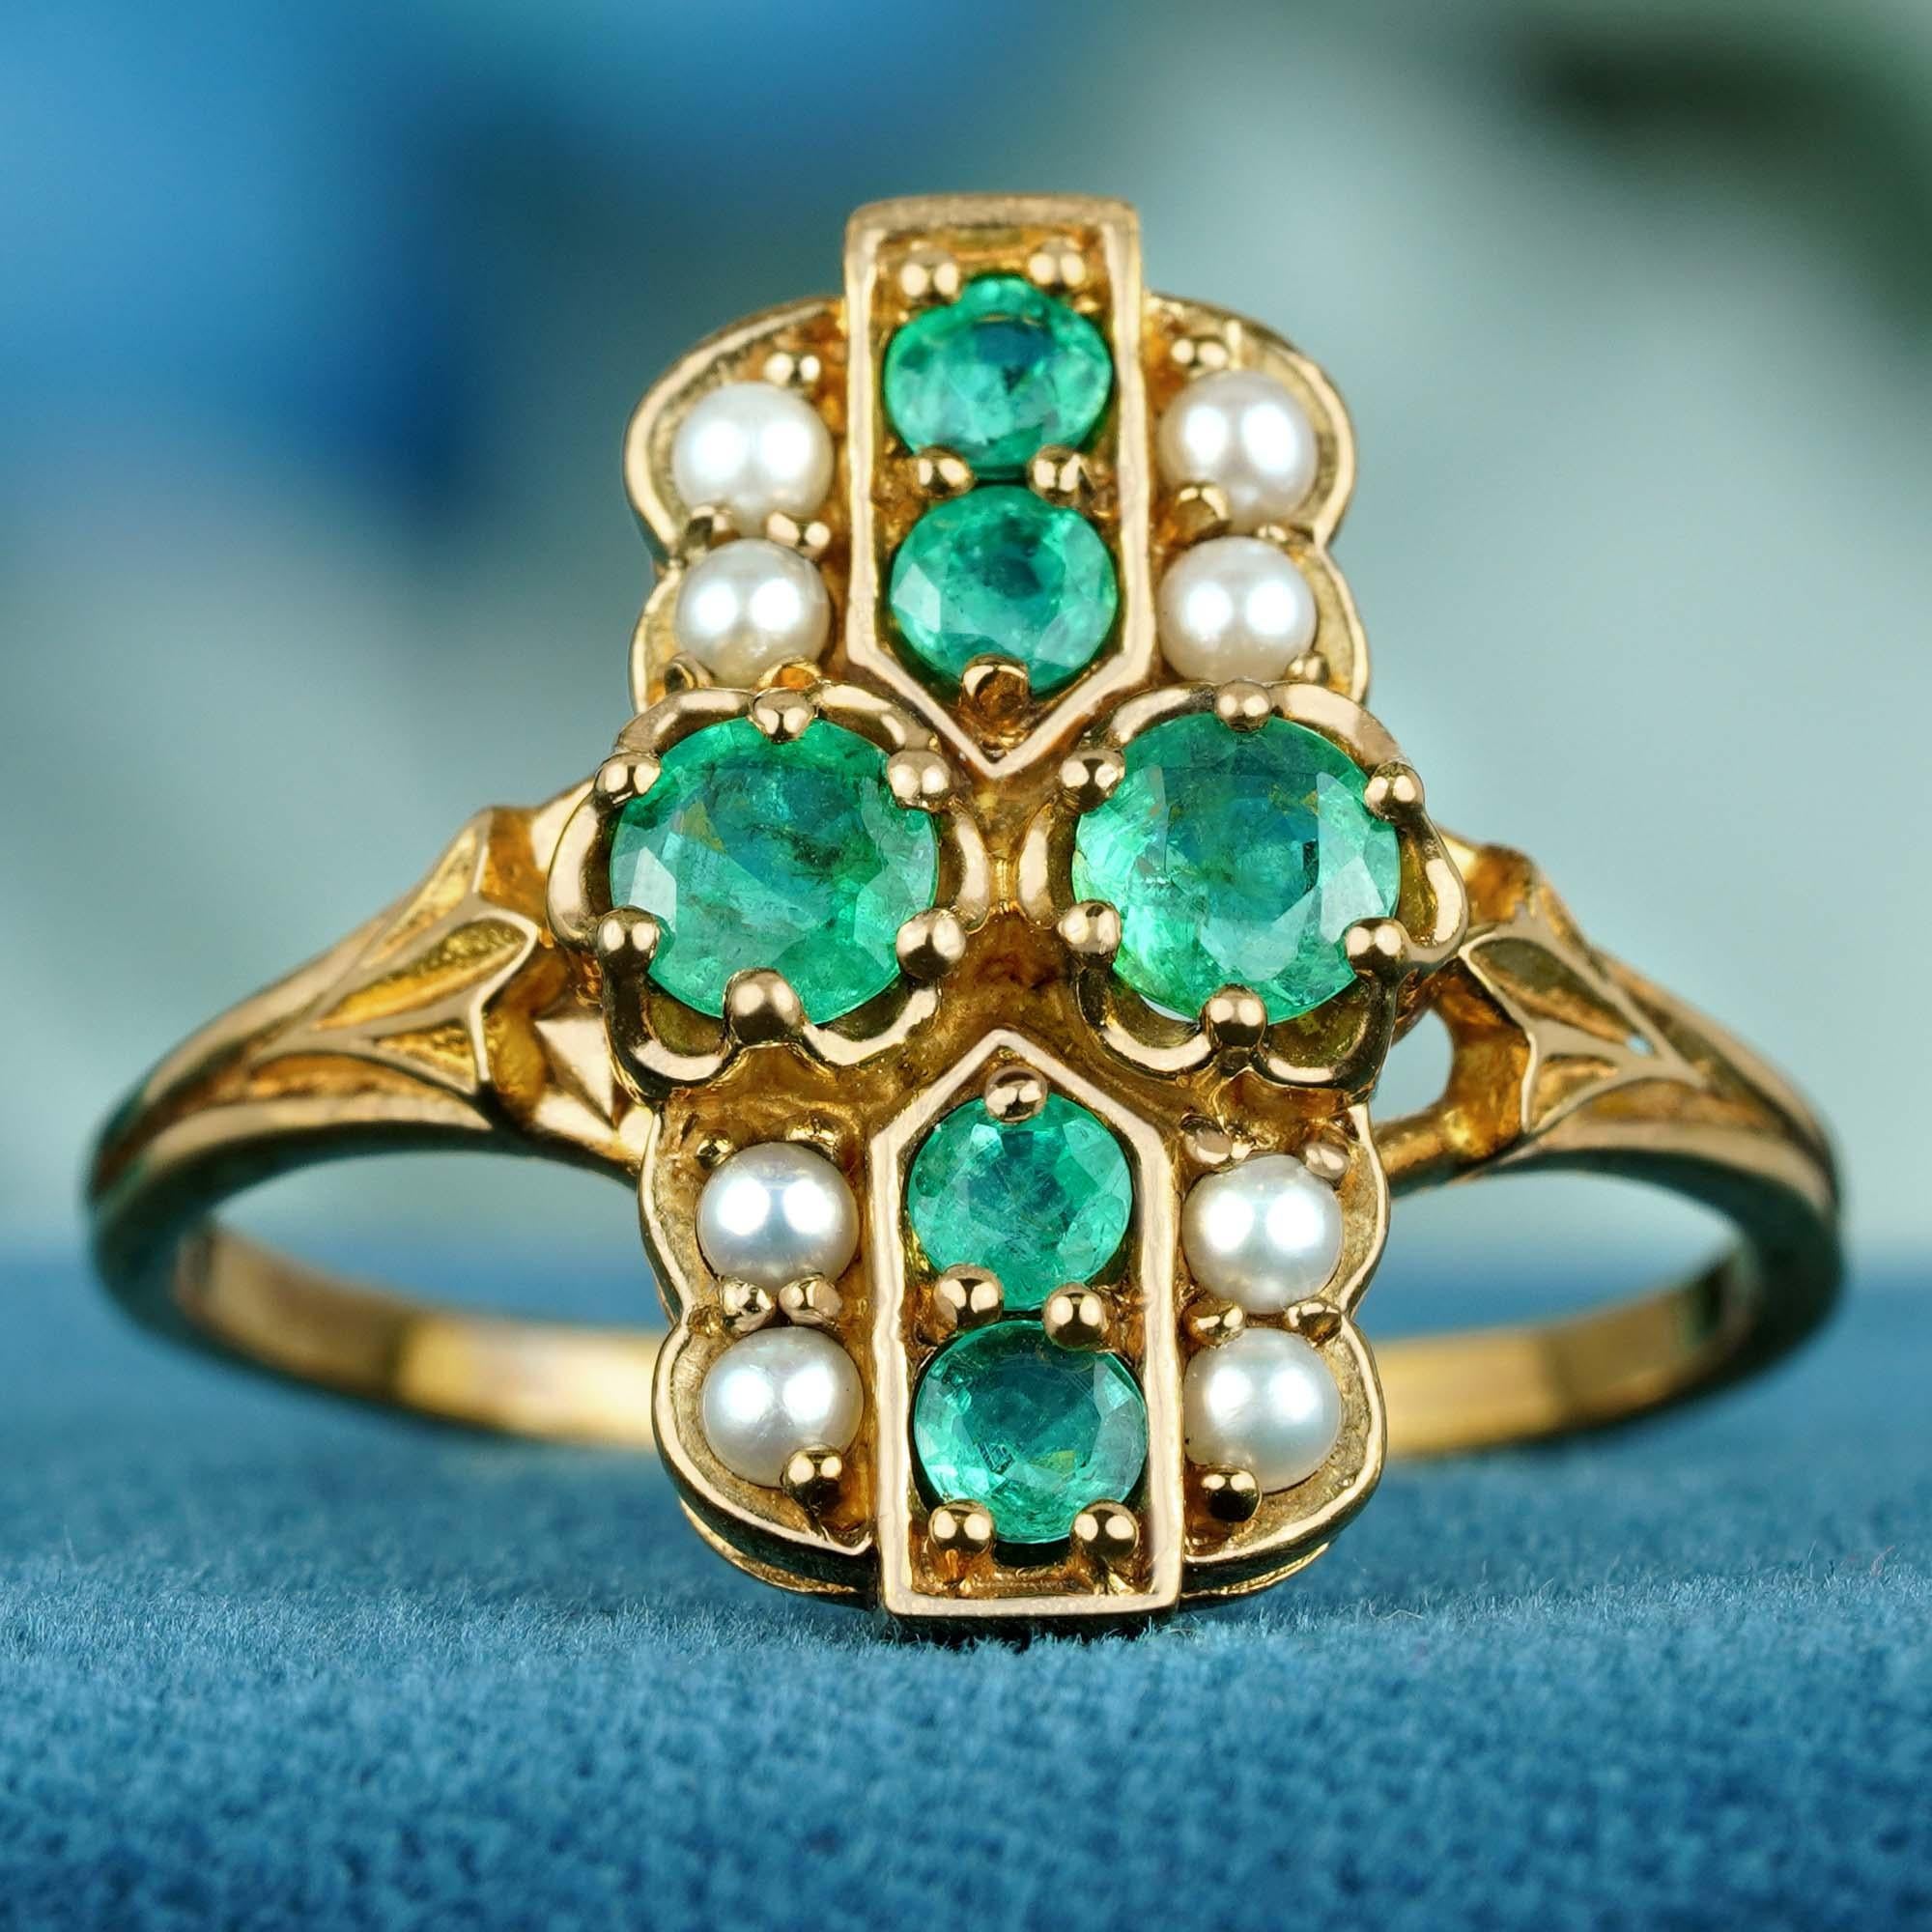 For Sale:  Natural Emerald and Pearl Vintage Style Ring in Solid 9K Gold 3